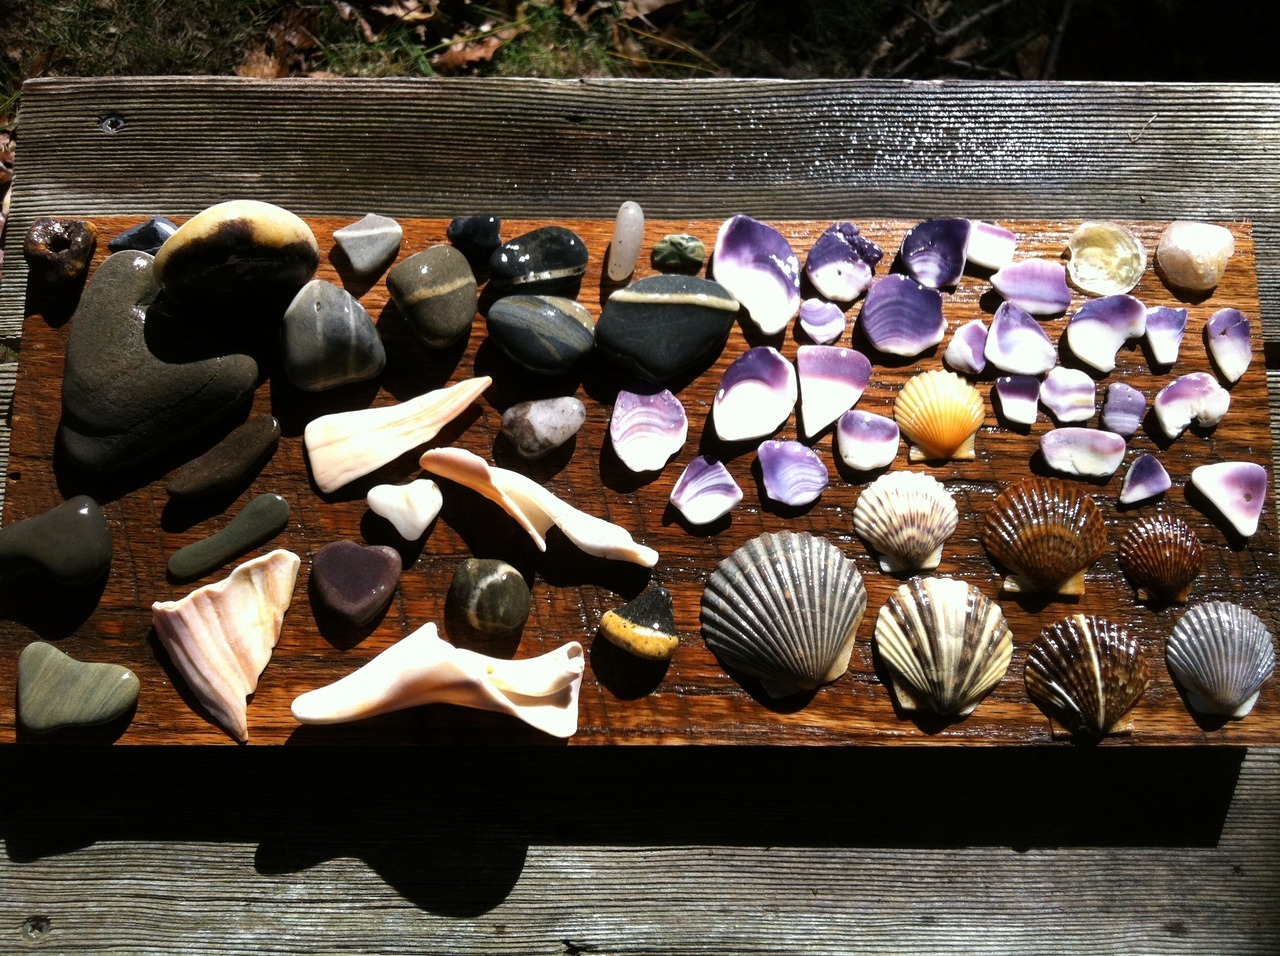 And here’s all the other stuff that i grab when I’m at the beach 